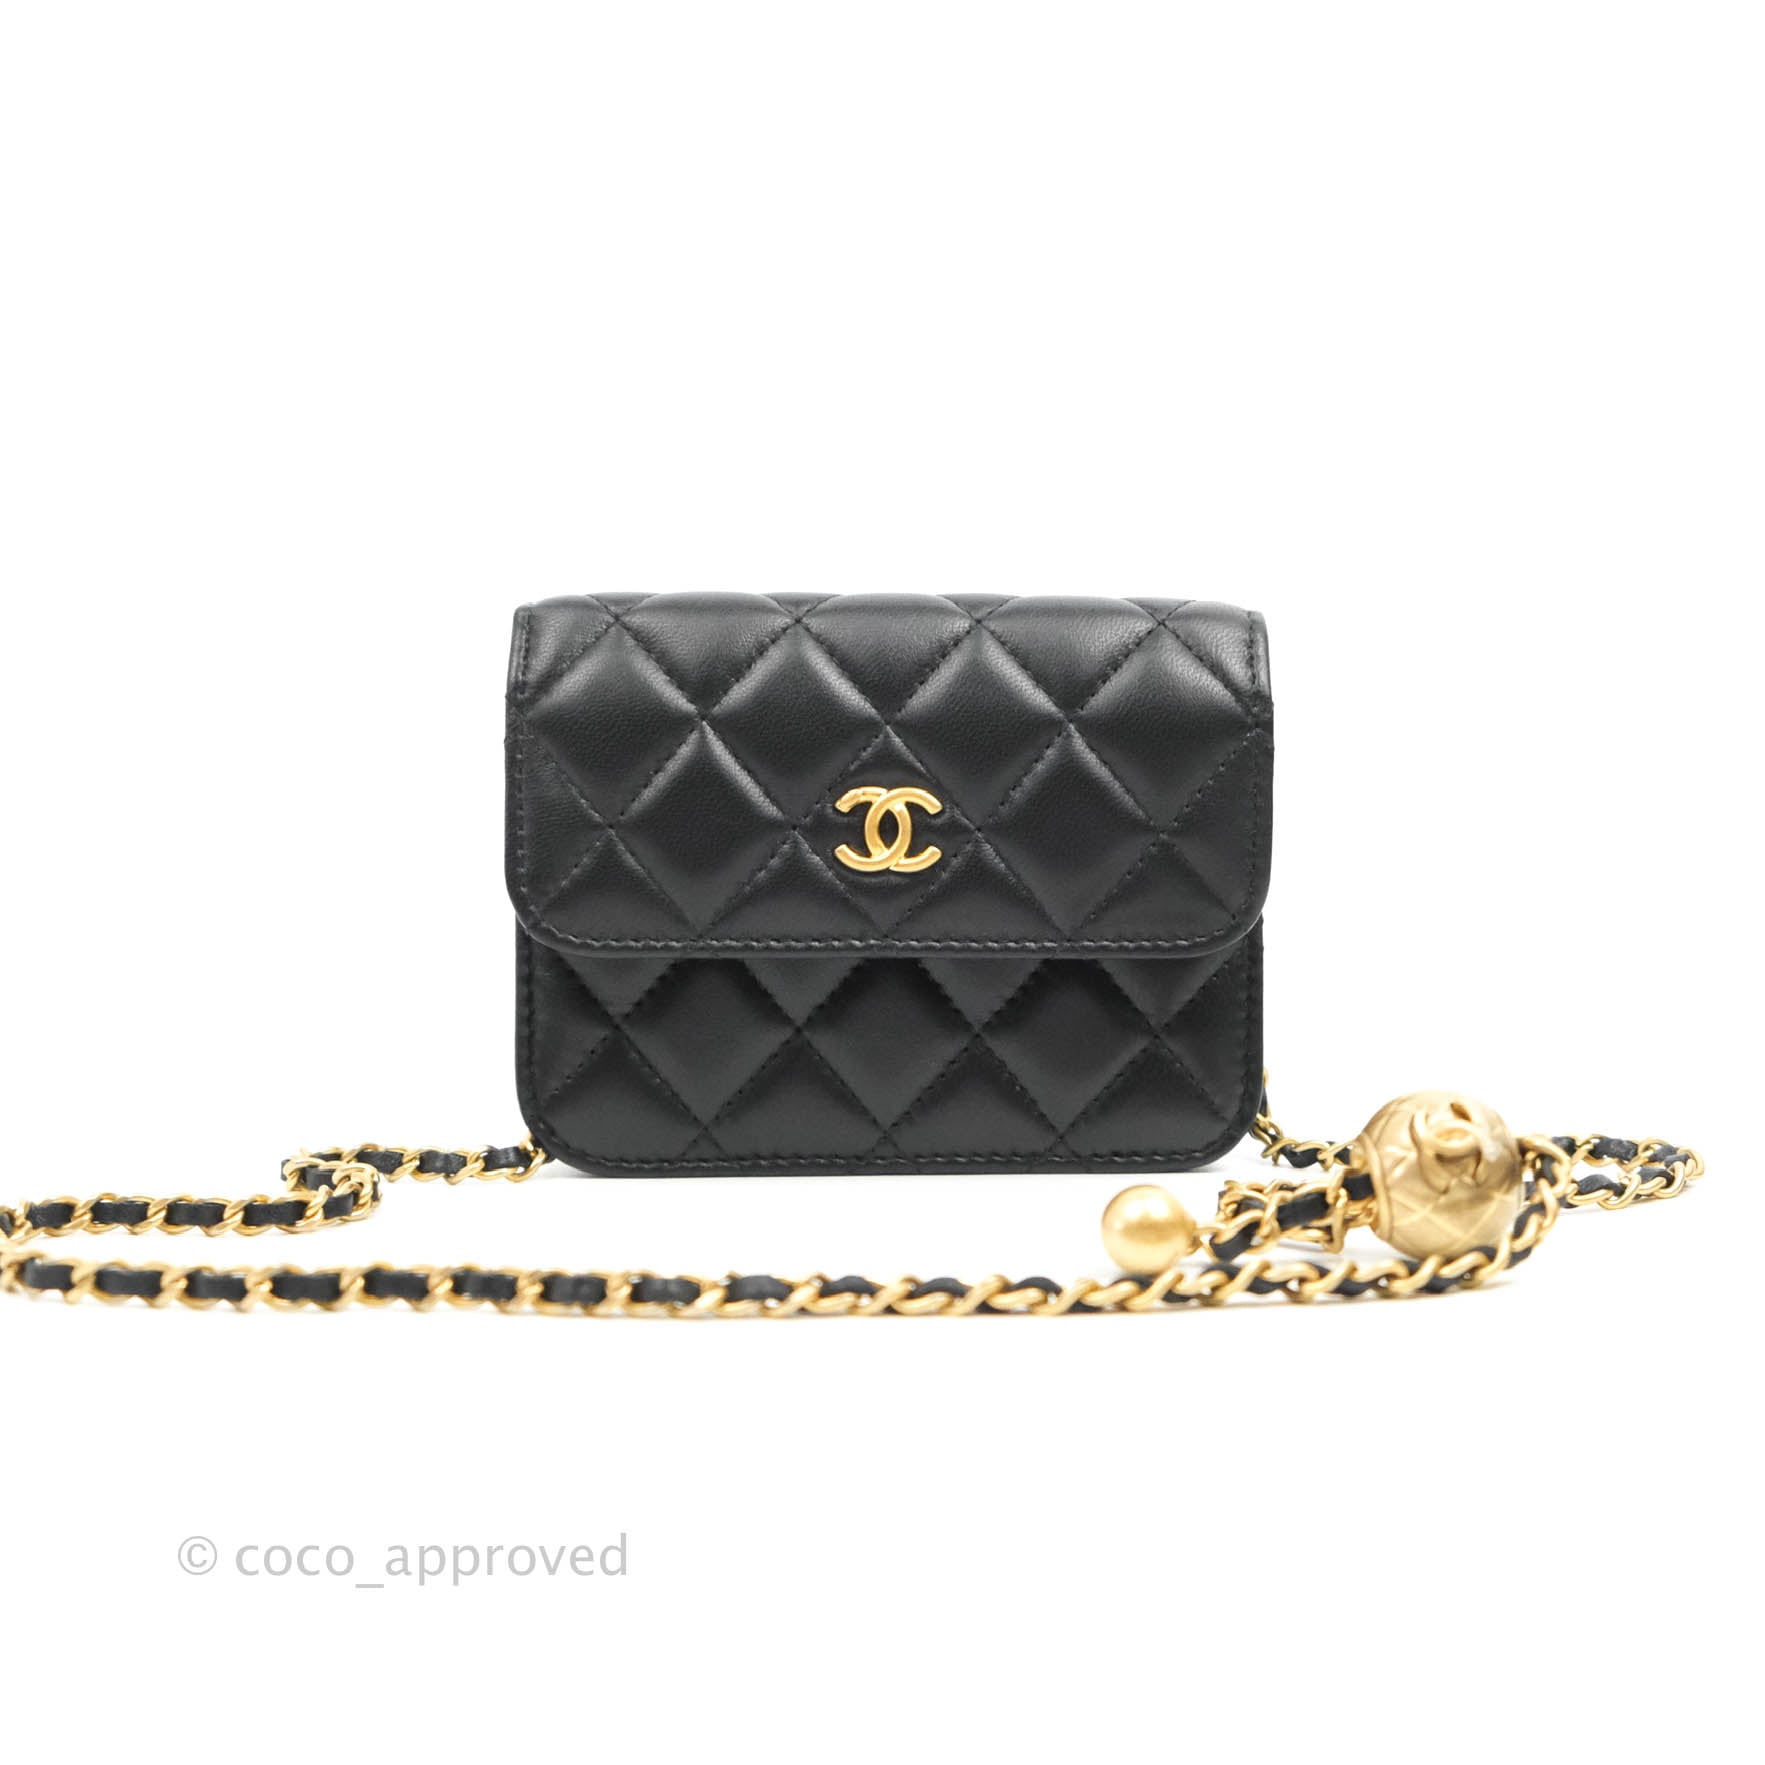 CHANEL, Bags, Authentic Chanel Lambskin Quilted Cc Pearl Crush Mini Flap  Bag In Black